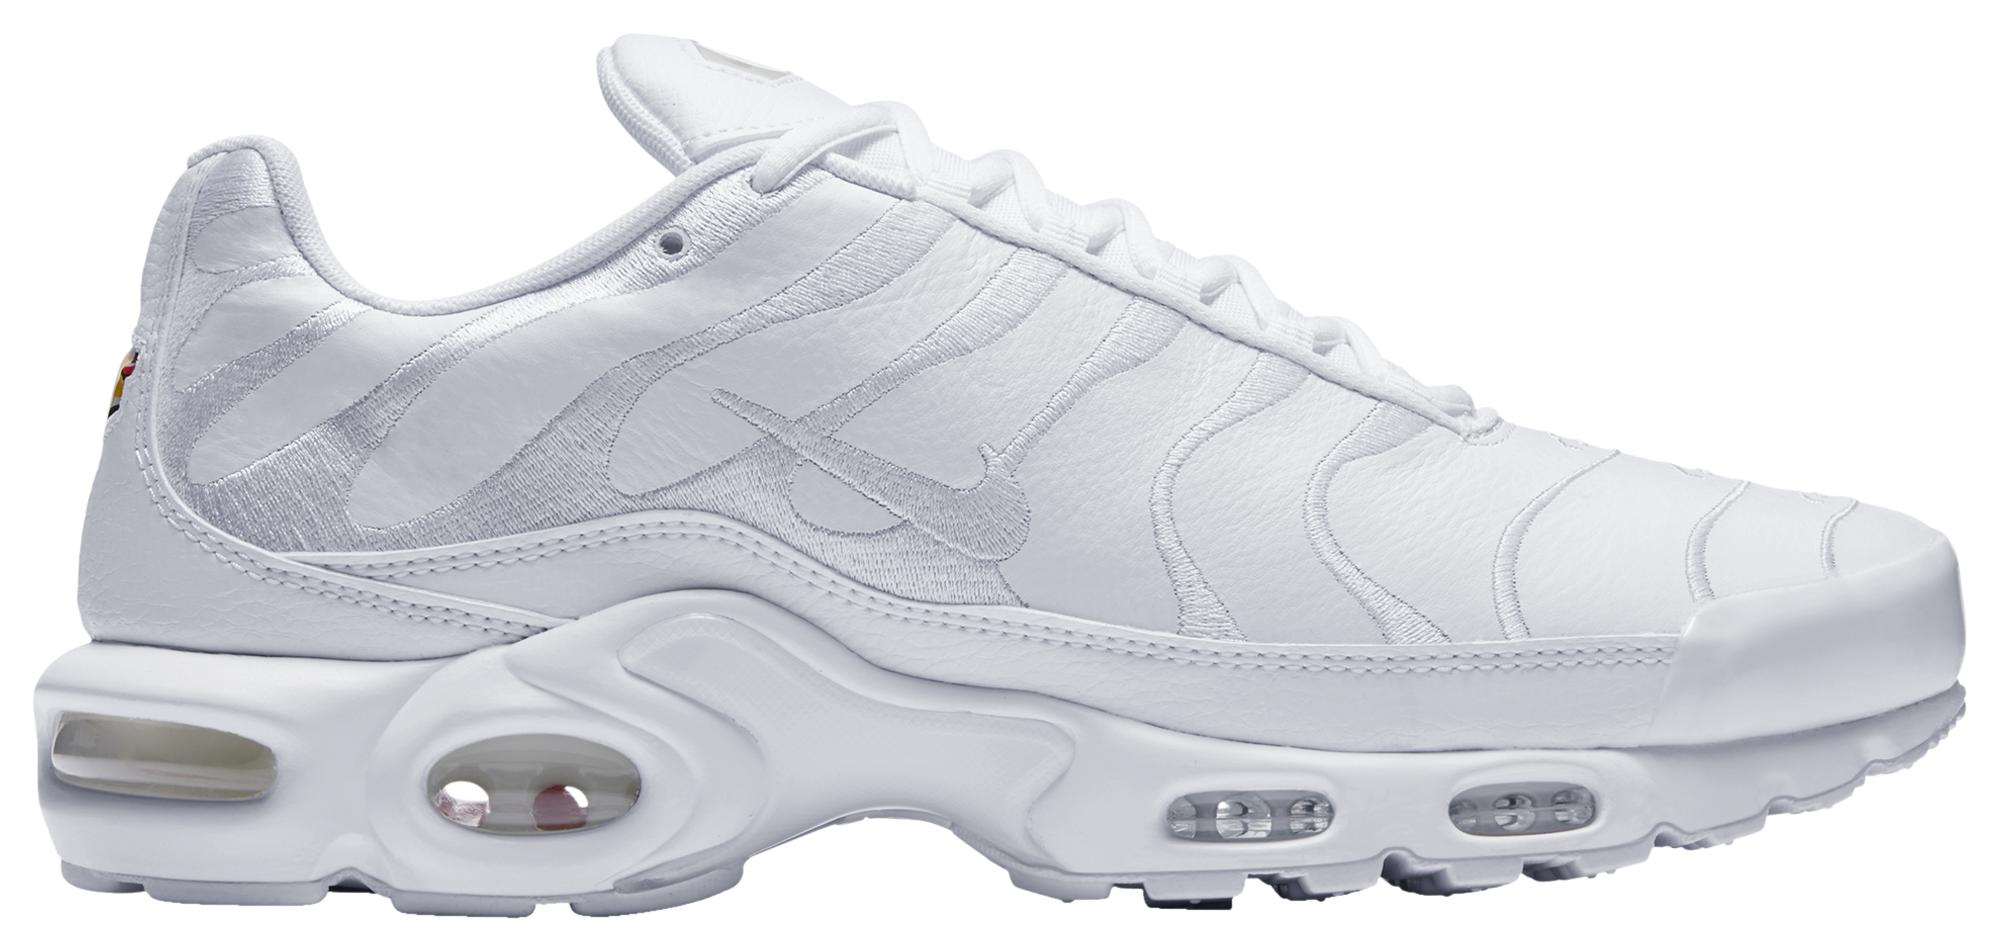 Nike Leather Air Max Plus - Running Shoes in White/White/White (White) for  Men - Save 18% - Lyst